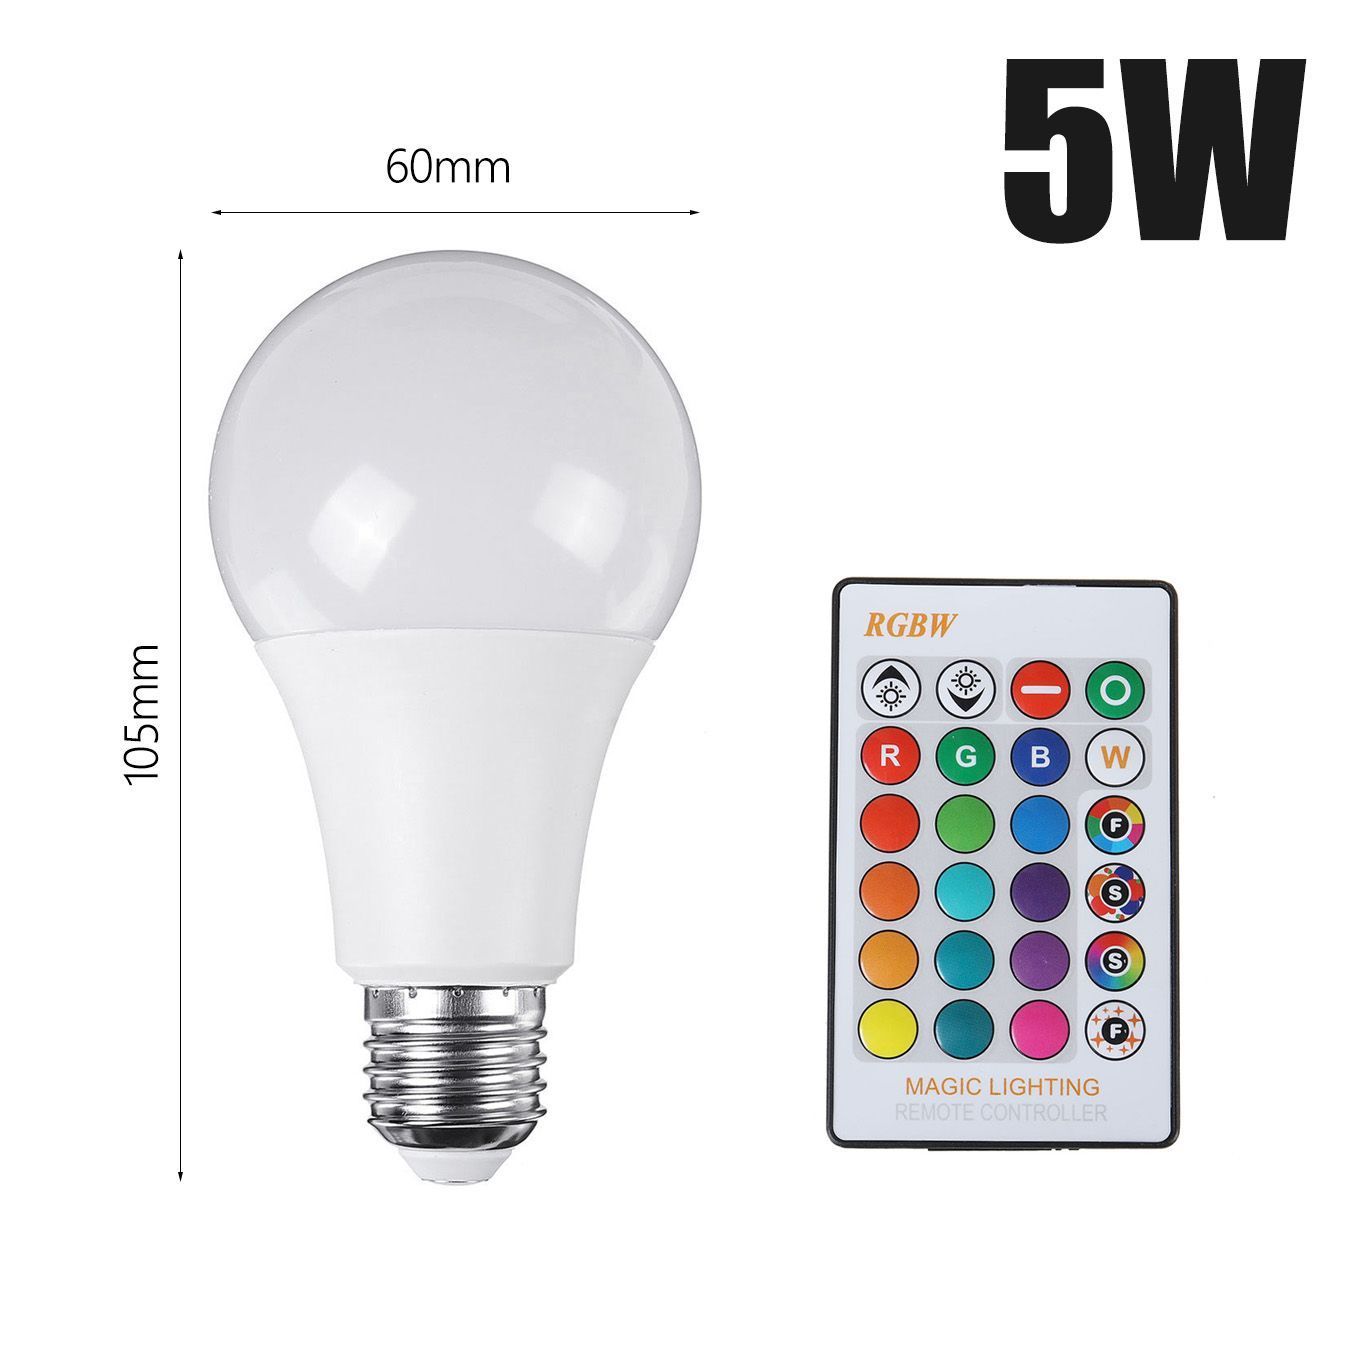 3W-5W-10W-15W-RGBW-E27-LED-Bulb-16-Color-Dimmable-Globe-Light-With-Remote-Control-For-Party-Decorati-1680651